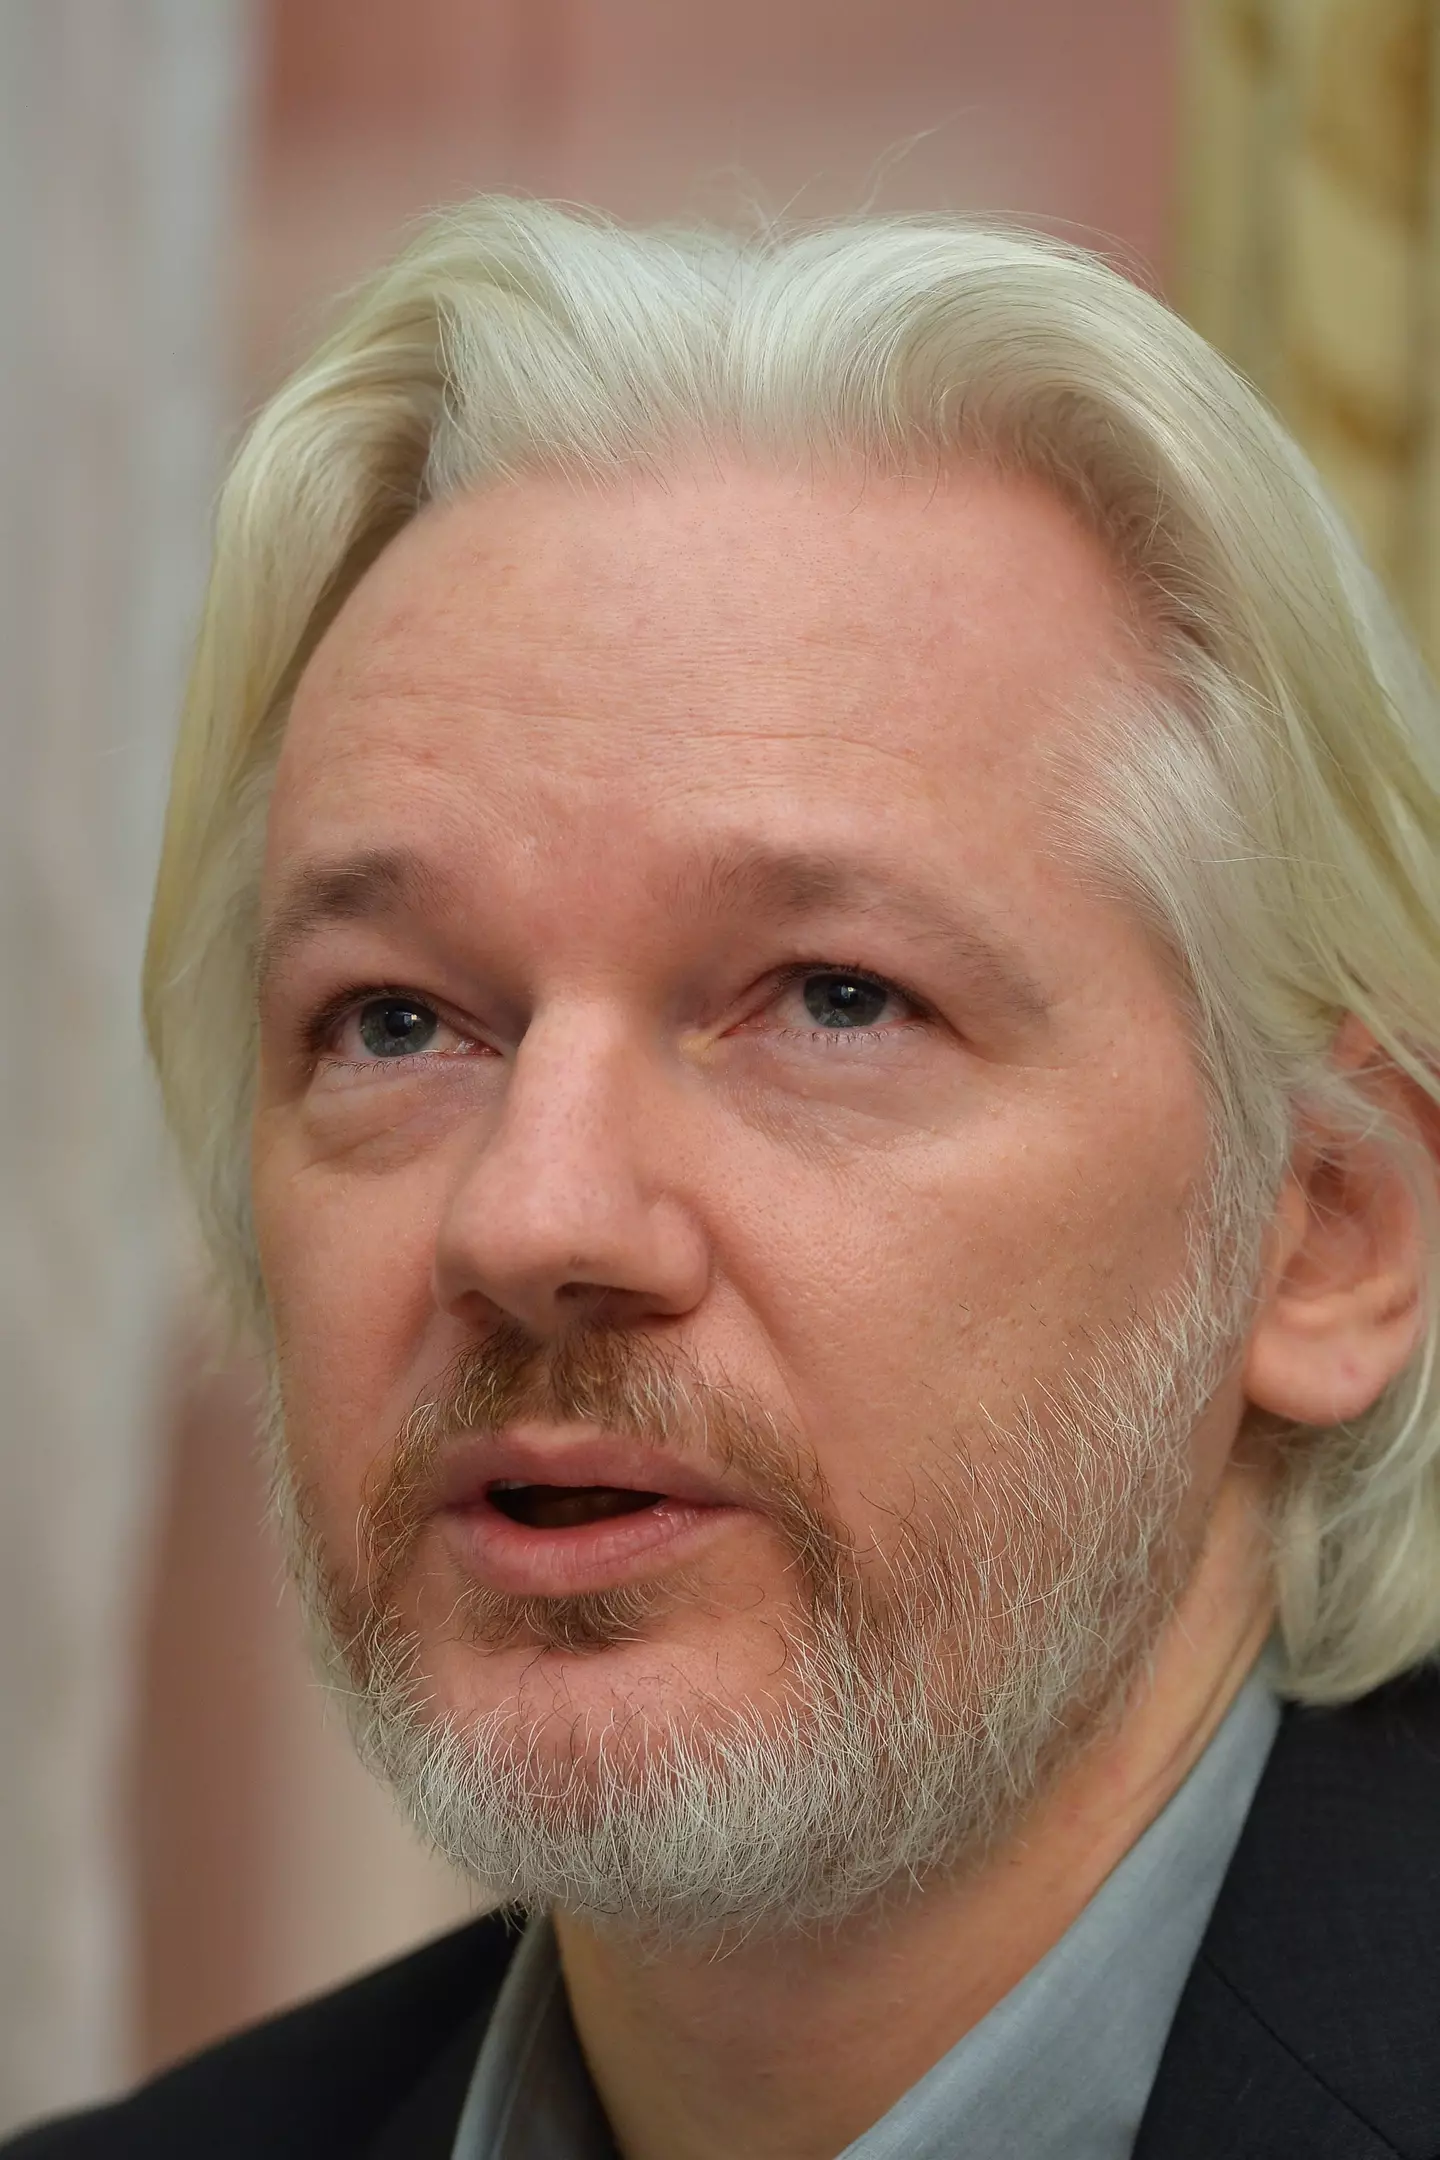 A court has ordered for the extradition of Julian Assange to the US.